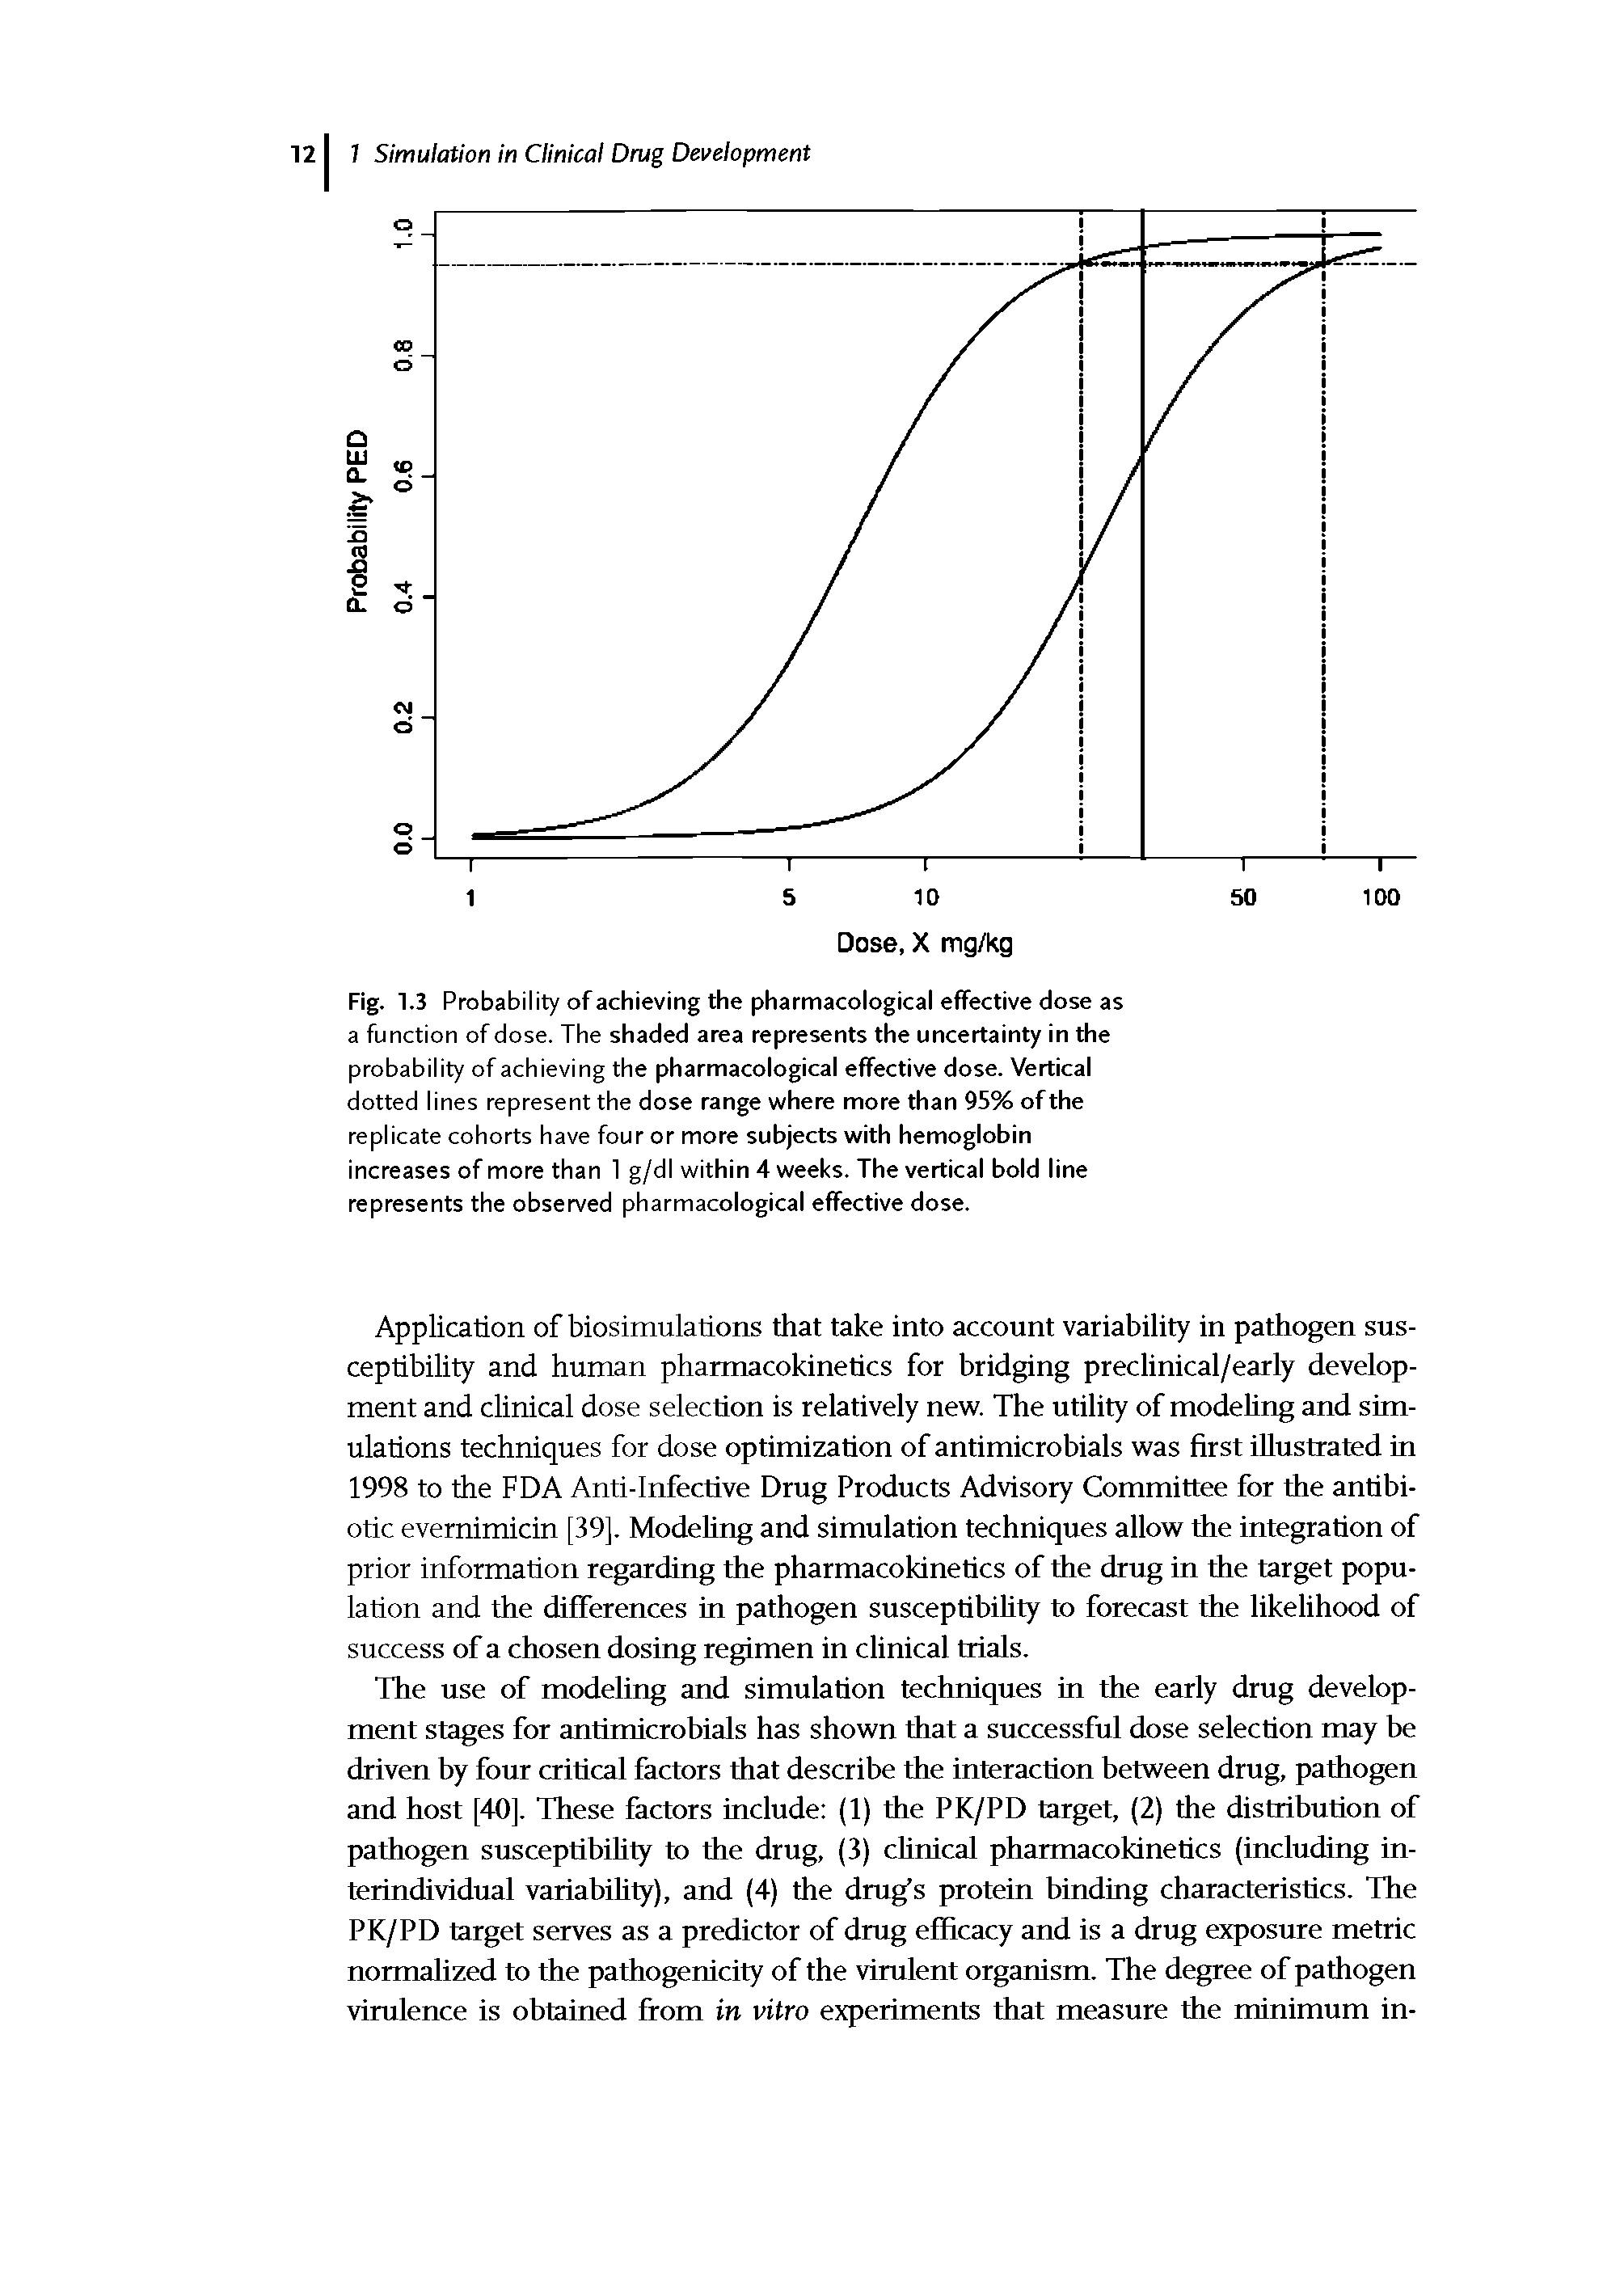 Fig. 1.3 Probability of achieving the pharmacological effective dose as a function of dose. The shaded area represents the uncertainty in the probability of achieving the pharmacological effective dose. Vertical dotted lines represent the dose range where more than 95% of the replicate cohorts have four or more subjects with hemoglobin increases of more than 1 g/dl within 4 weeks. The vertical bold line represents the observed pharmacological effective dose.